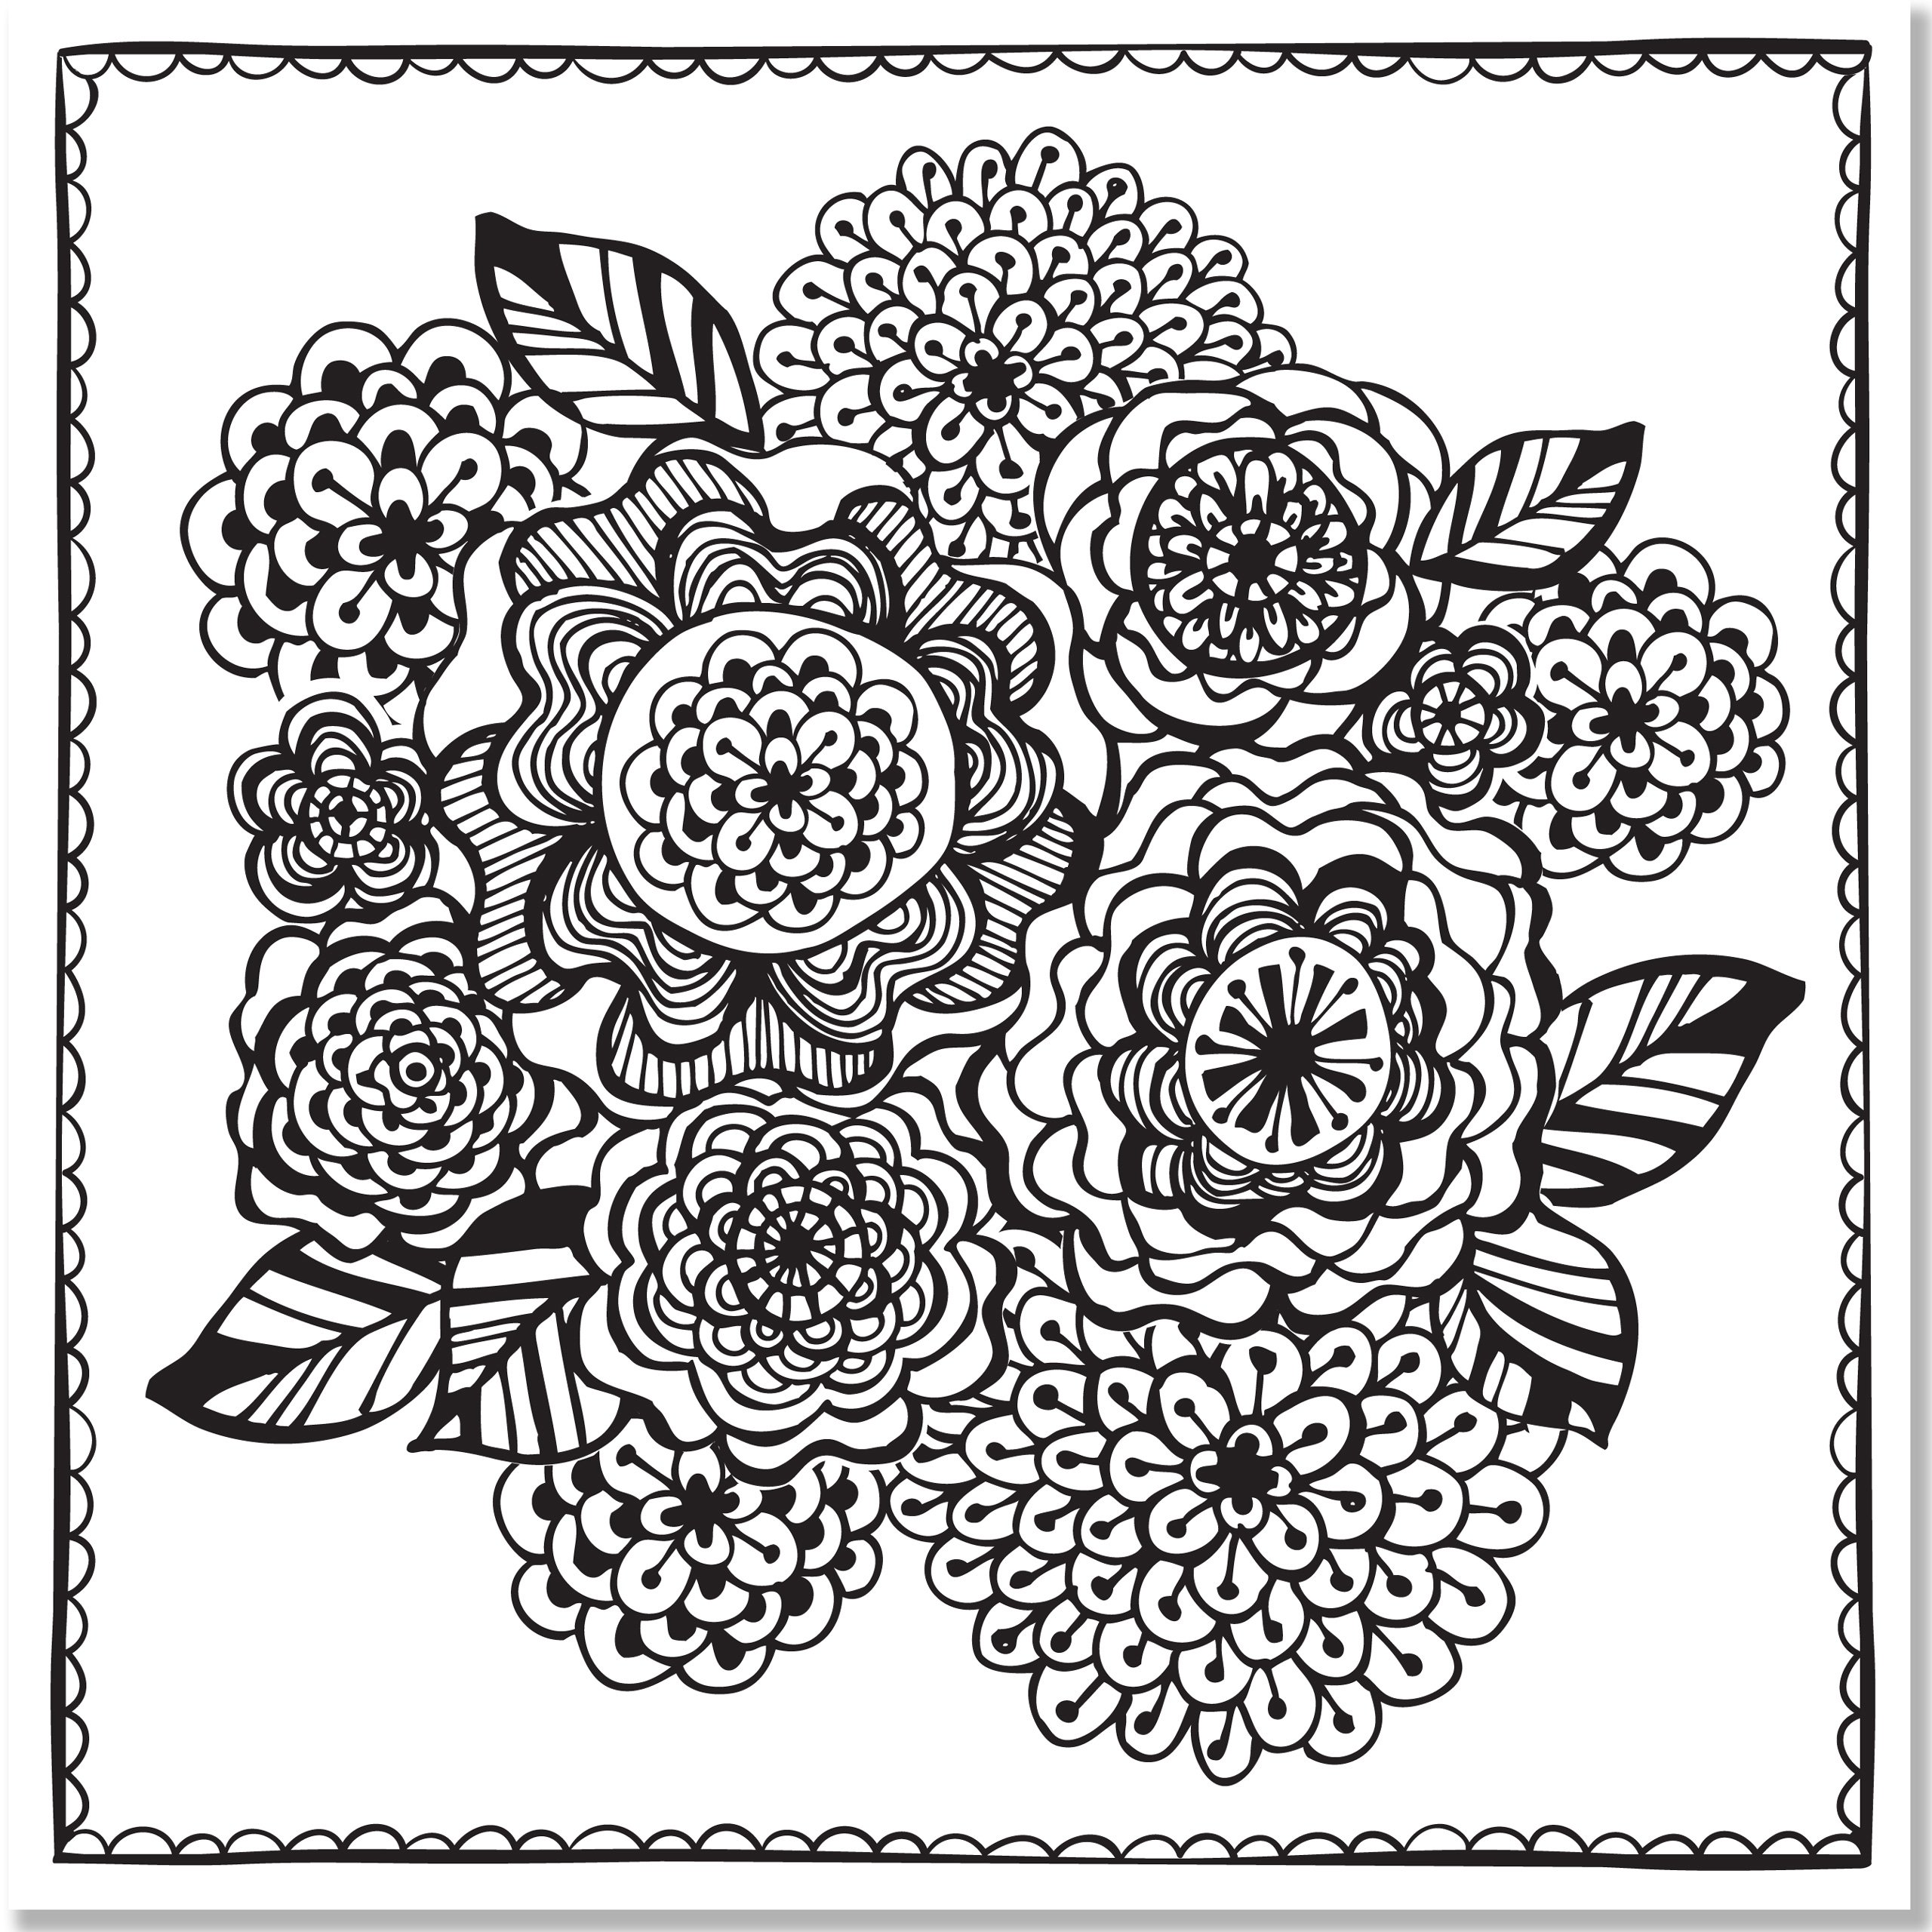 Download Joyful Designs Adult Coloring Book Awesome Toys Gifts